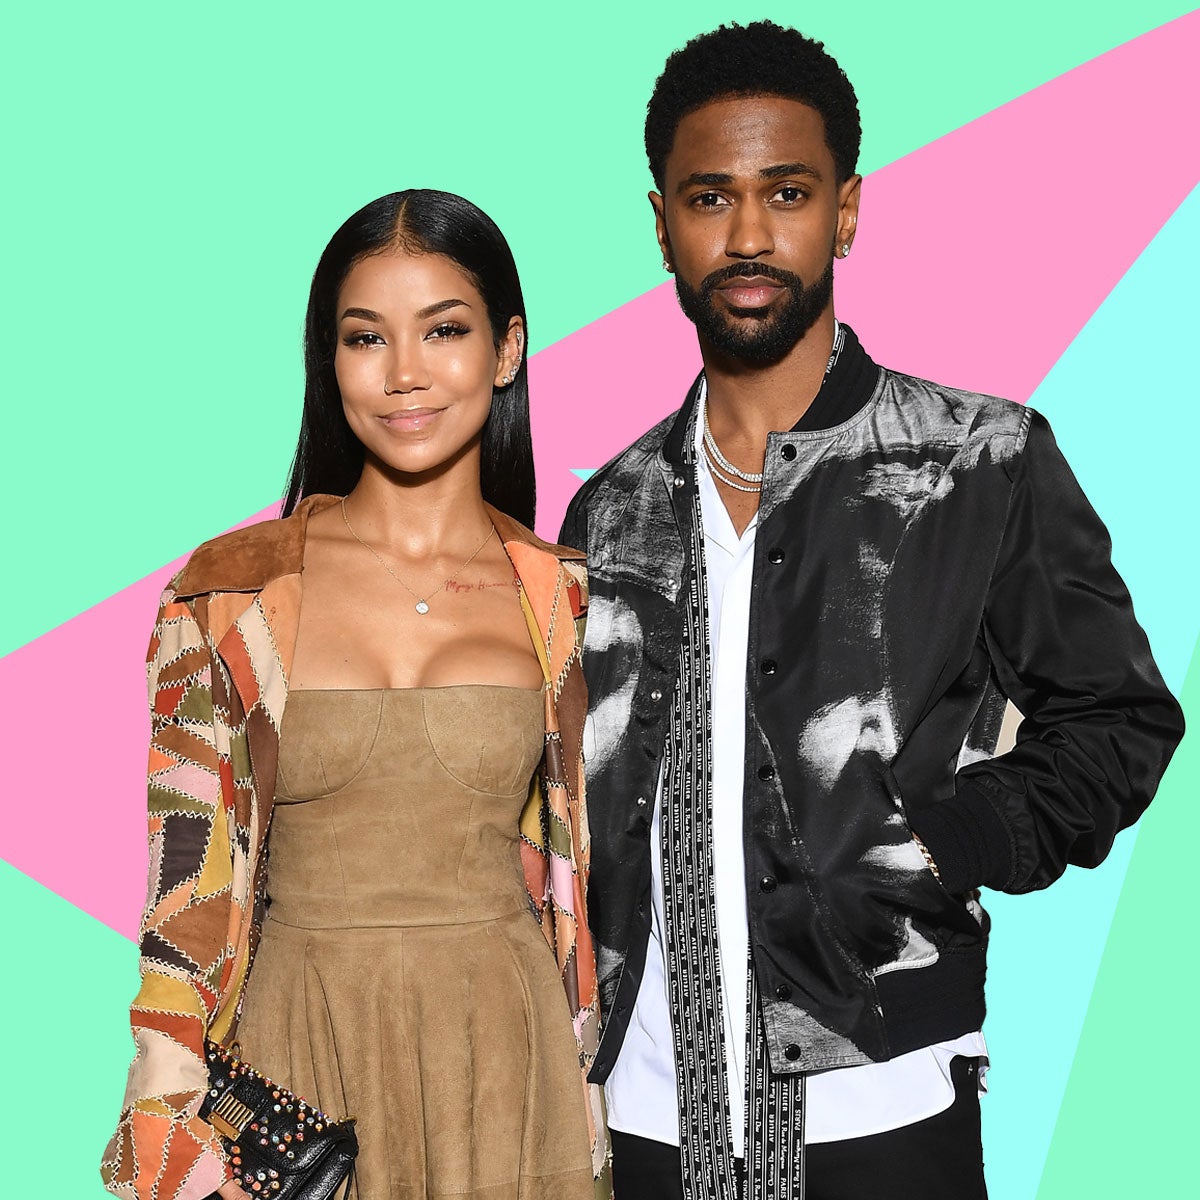 Big Sean Wishes Girlfriend Jhene Aiko A Happy Birthday: 'I Love You The Most Forever'